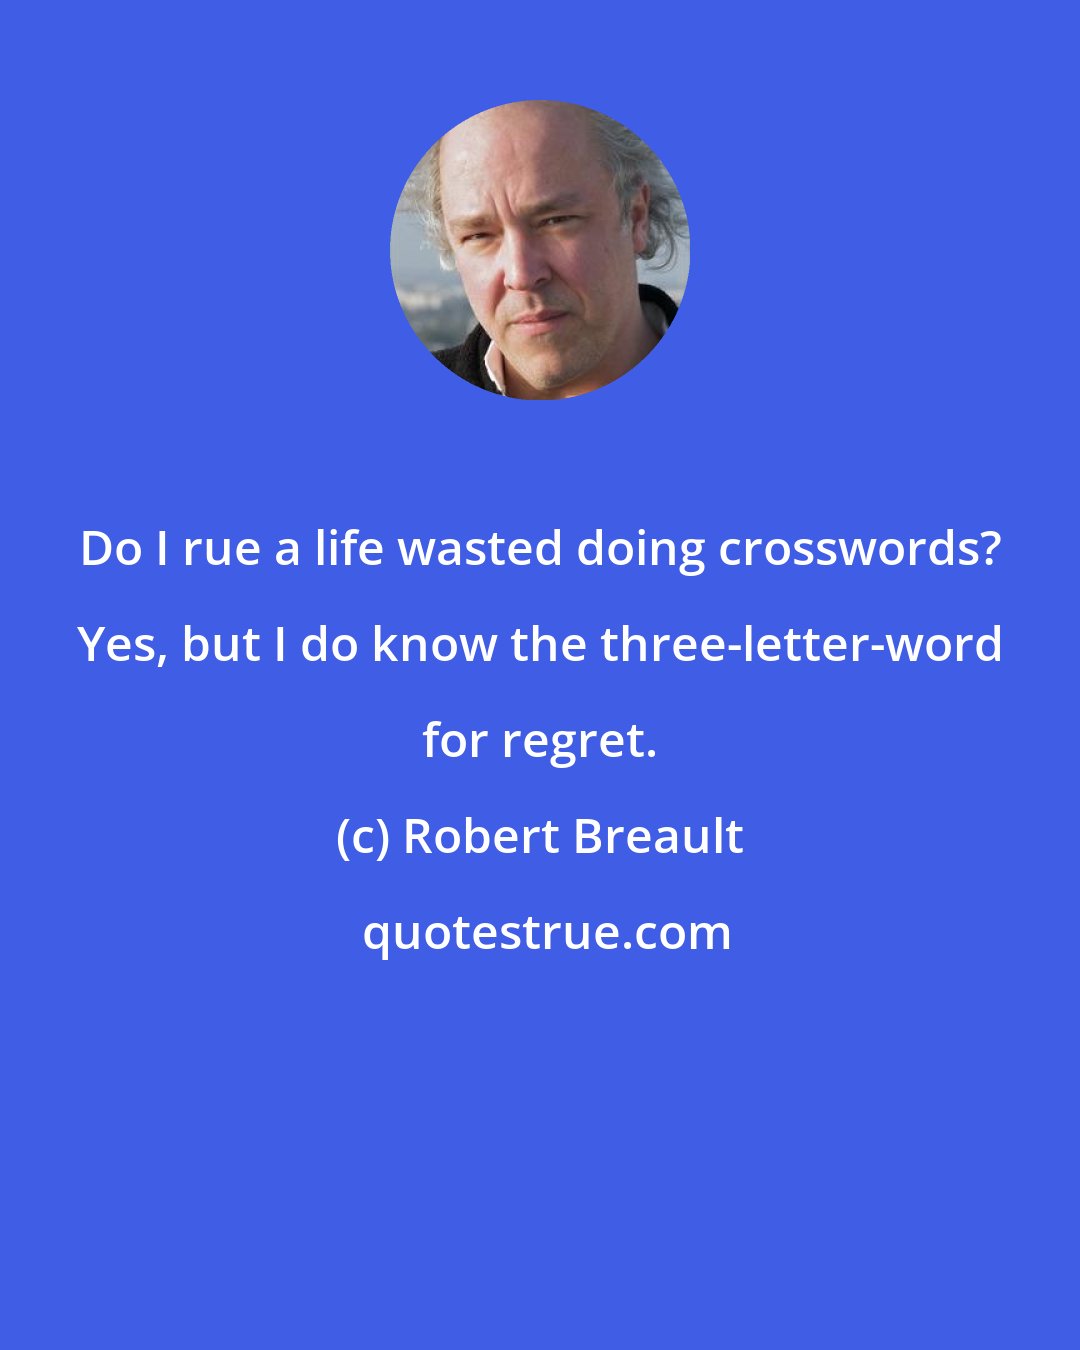 Robert Breault: Do I rue a life wasted doing crosswords? Yes, but I do know the three-letter-word for regret.